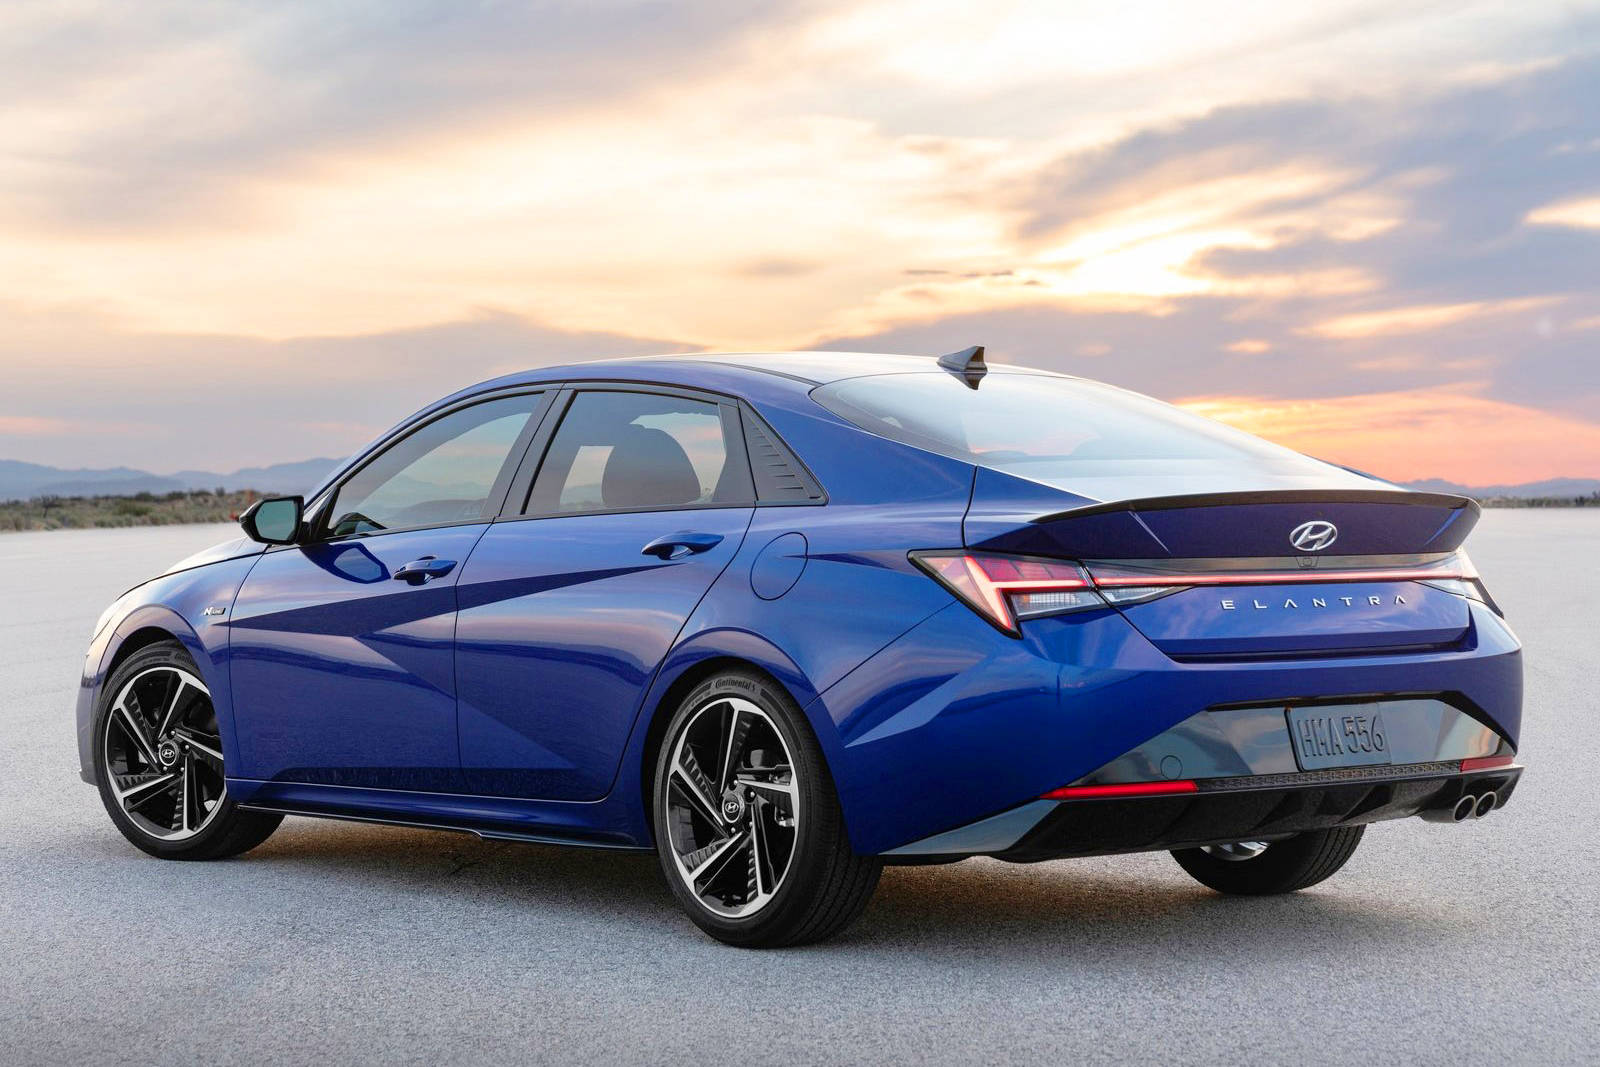 The 2021 Hyundai Elantra features attractive side creases extending along the door and rear-fender panels that blend into a knife-edged trunk lid.